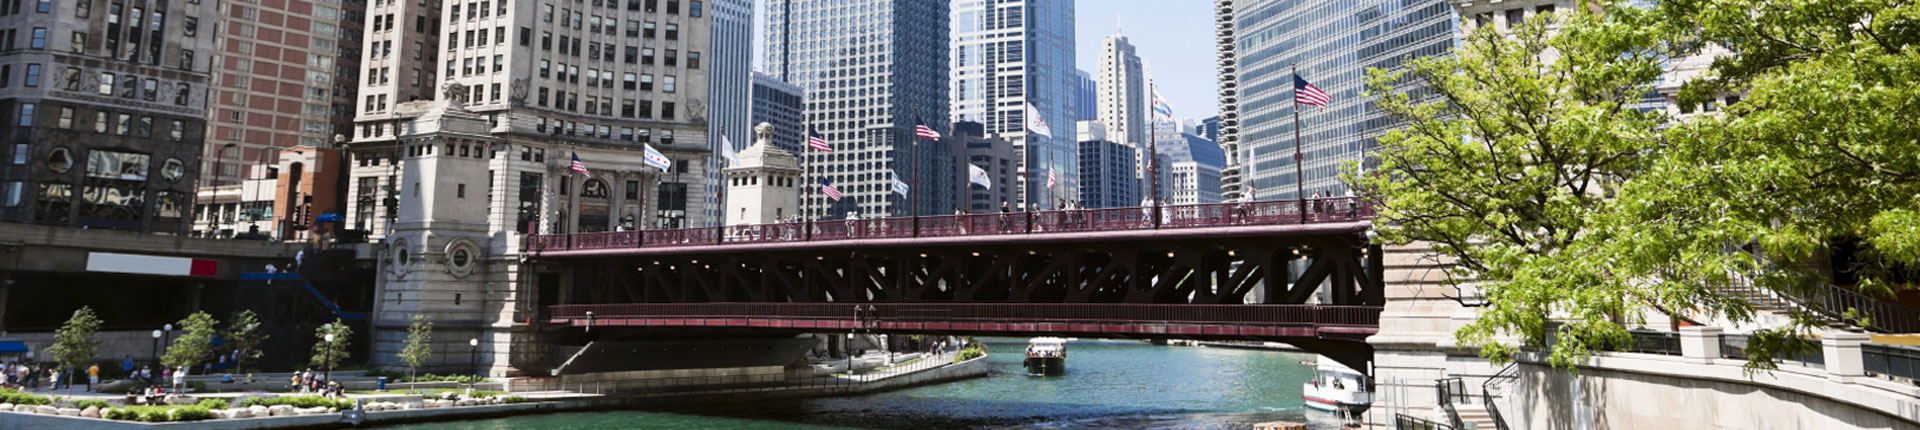 View of the Chicago river, riverwalk and skyline